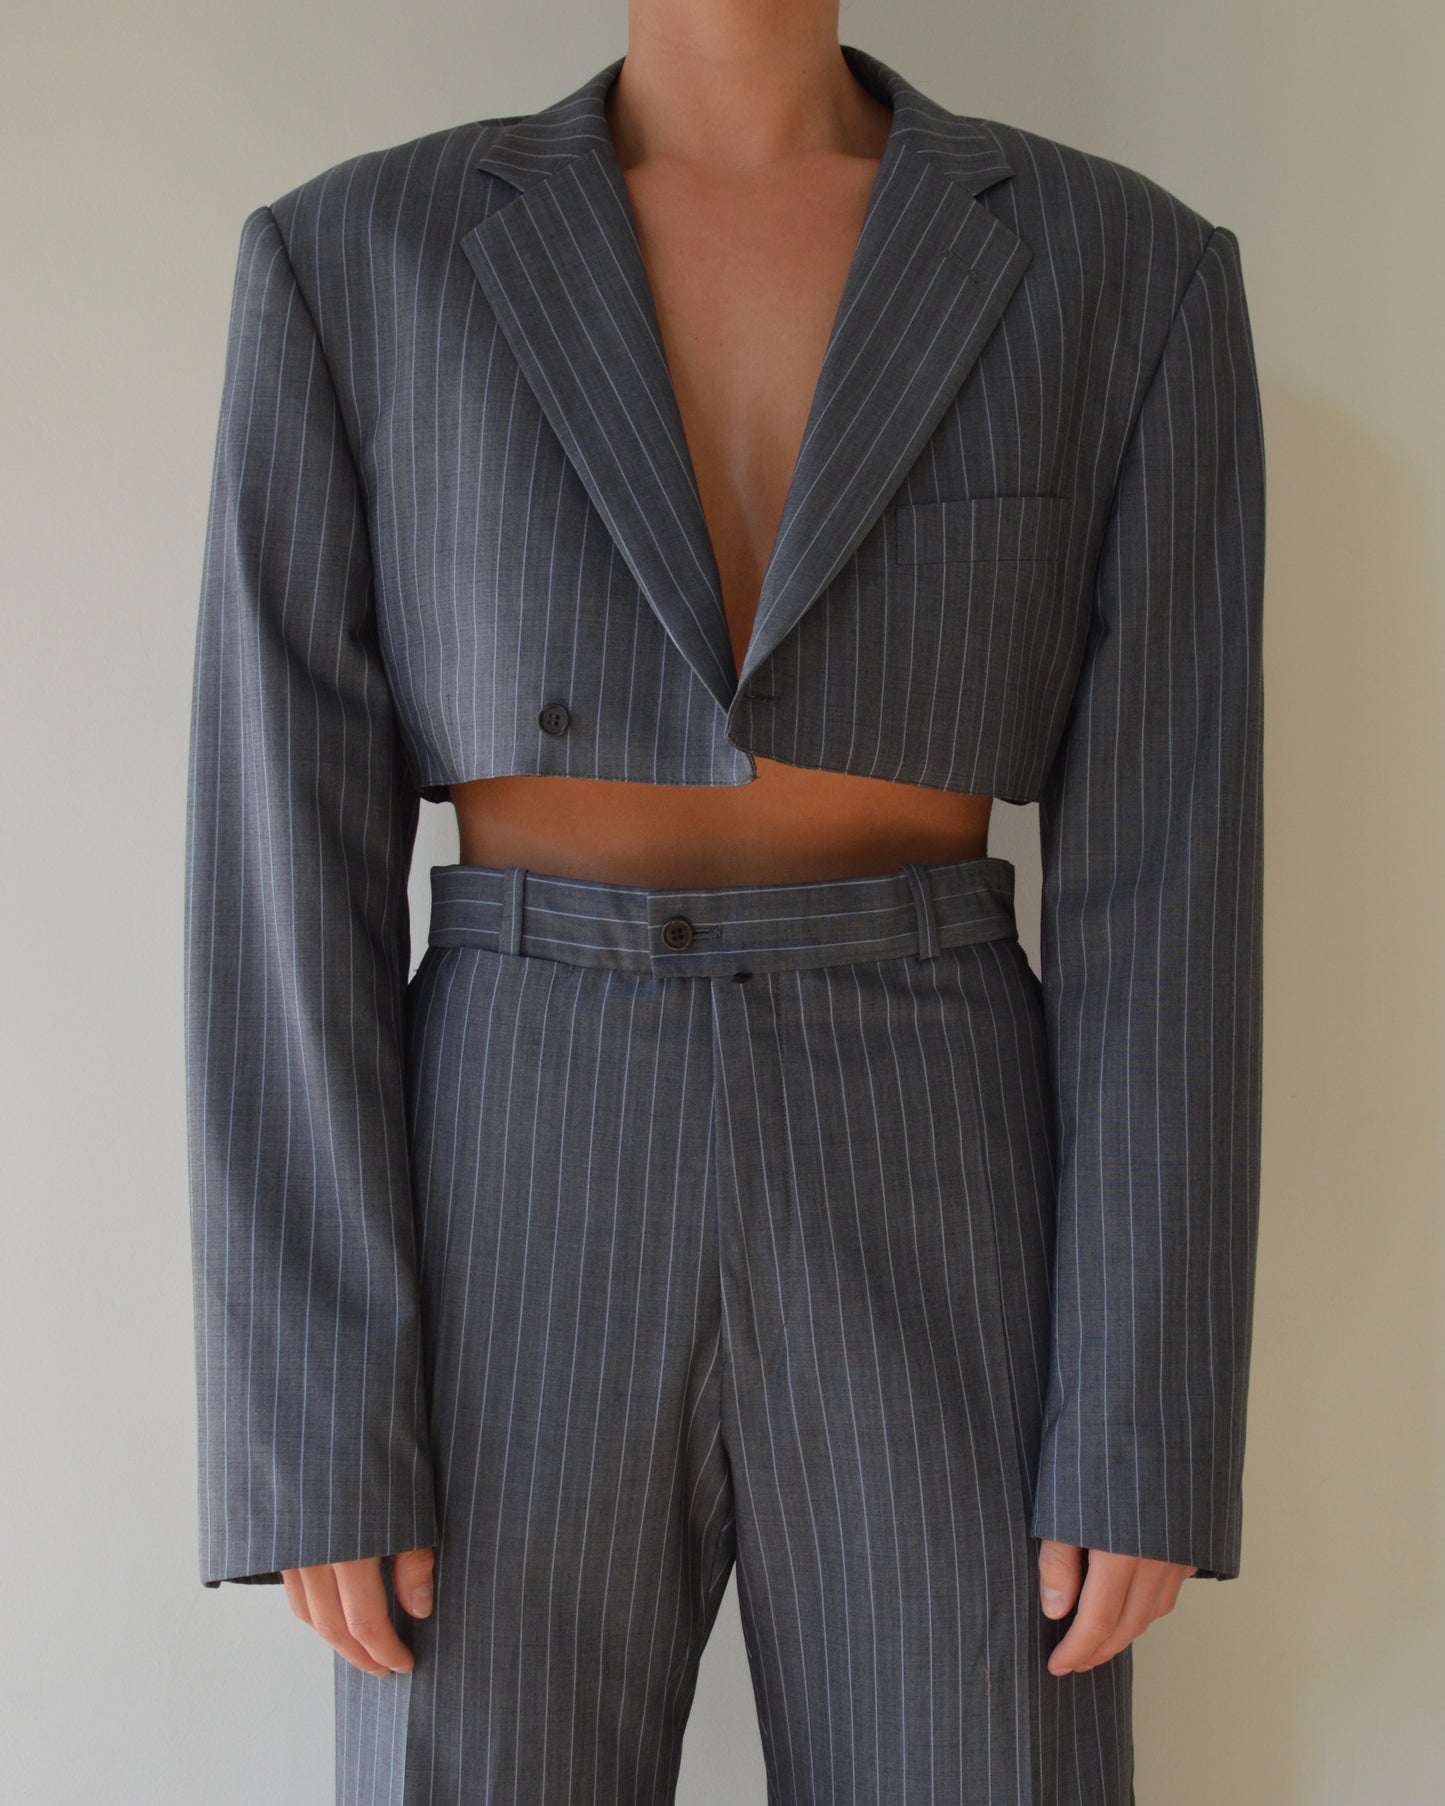 Blaset with trousers - gray blue lines (XS/S)